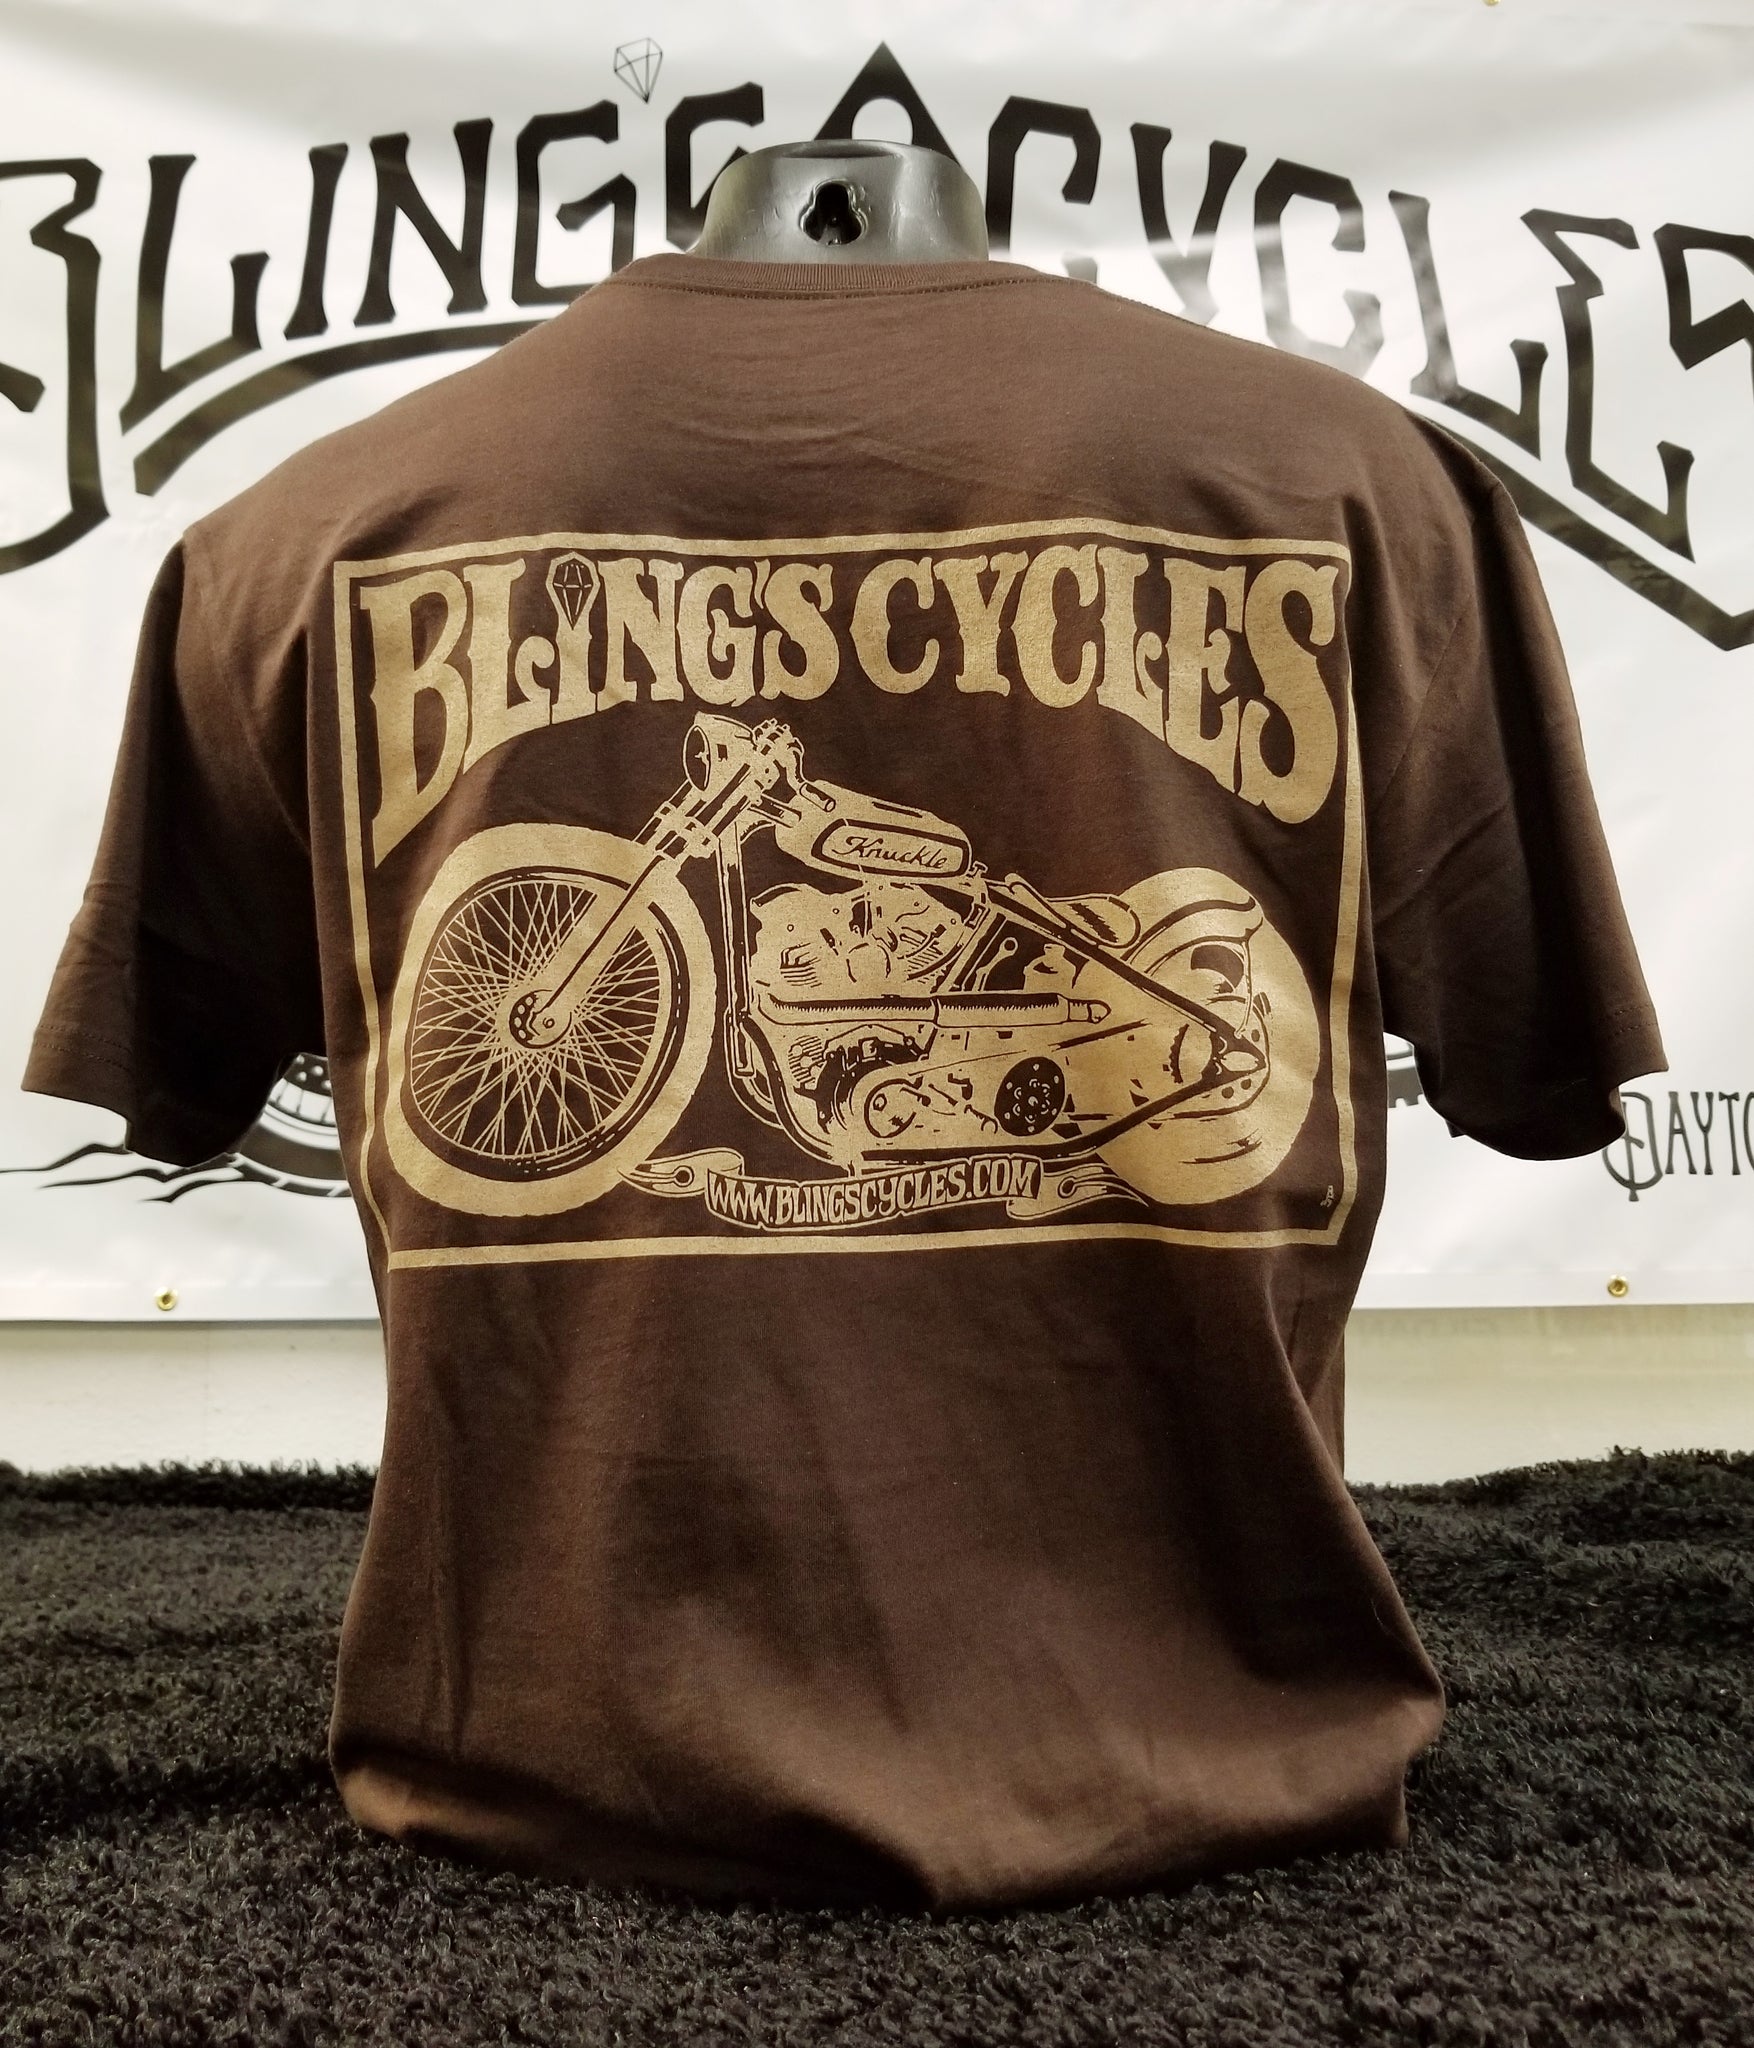 The brown Knuckle Tee